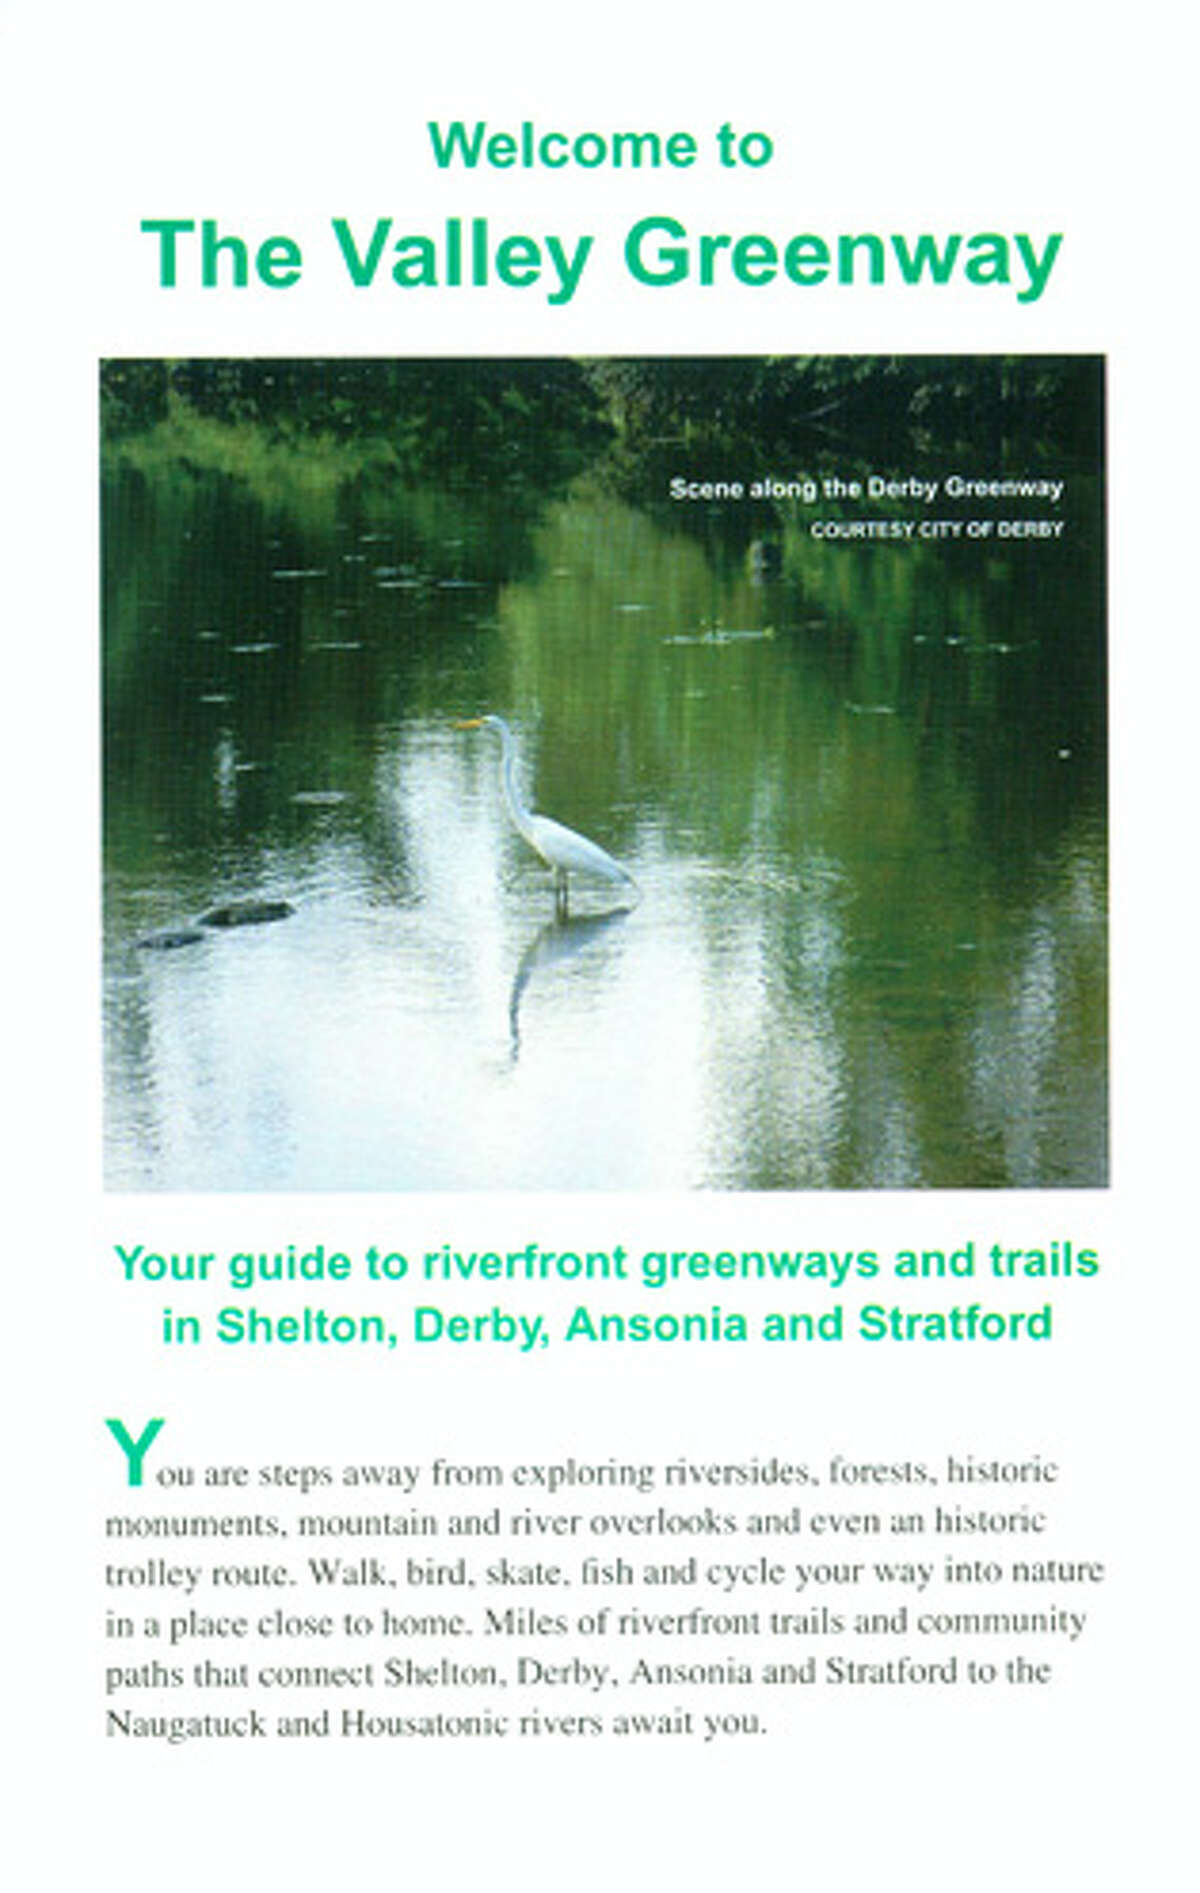 The cover to the Valley Greenway guide, published by the Housatonic Valley Association.